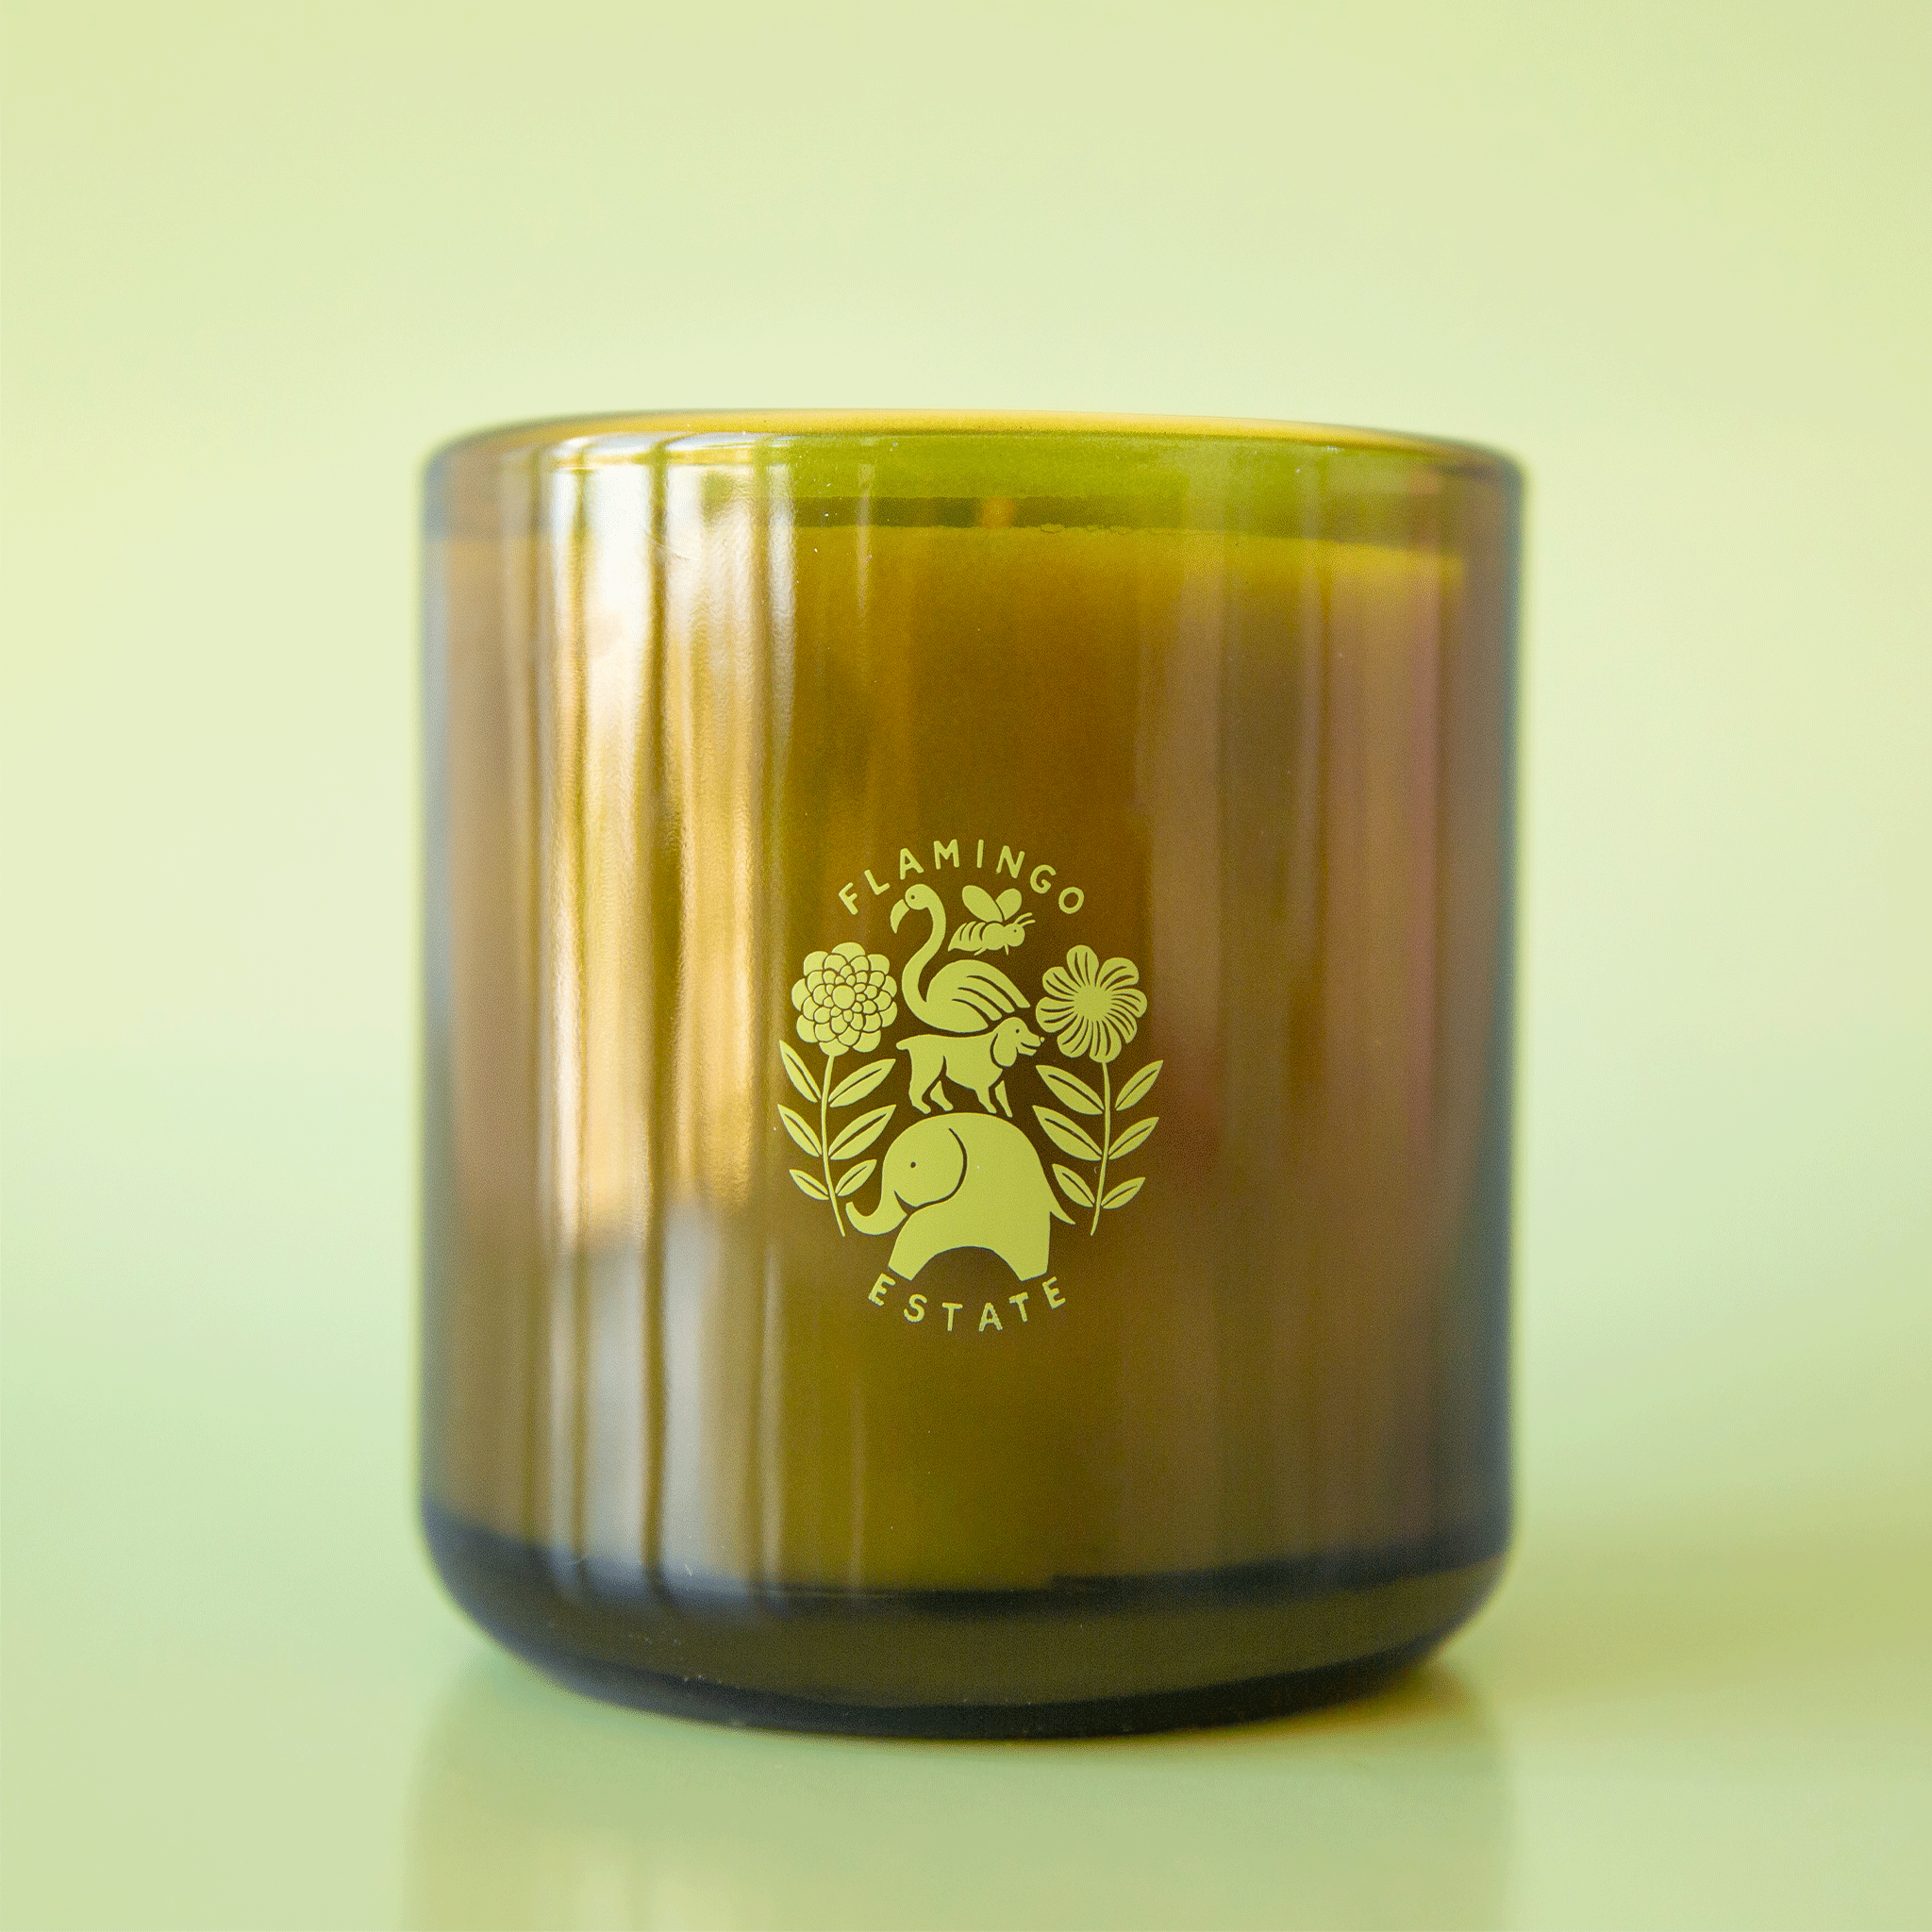 The back of the green glass jar candle with a Flamingo Estate logo on the front that features a flamingo, dog and elephant graphic in the center. 